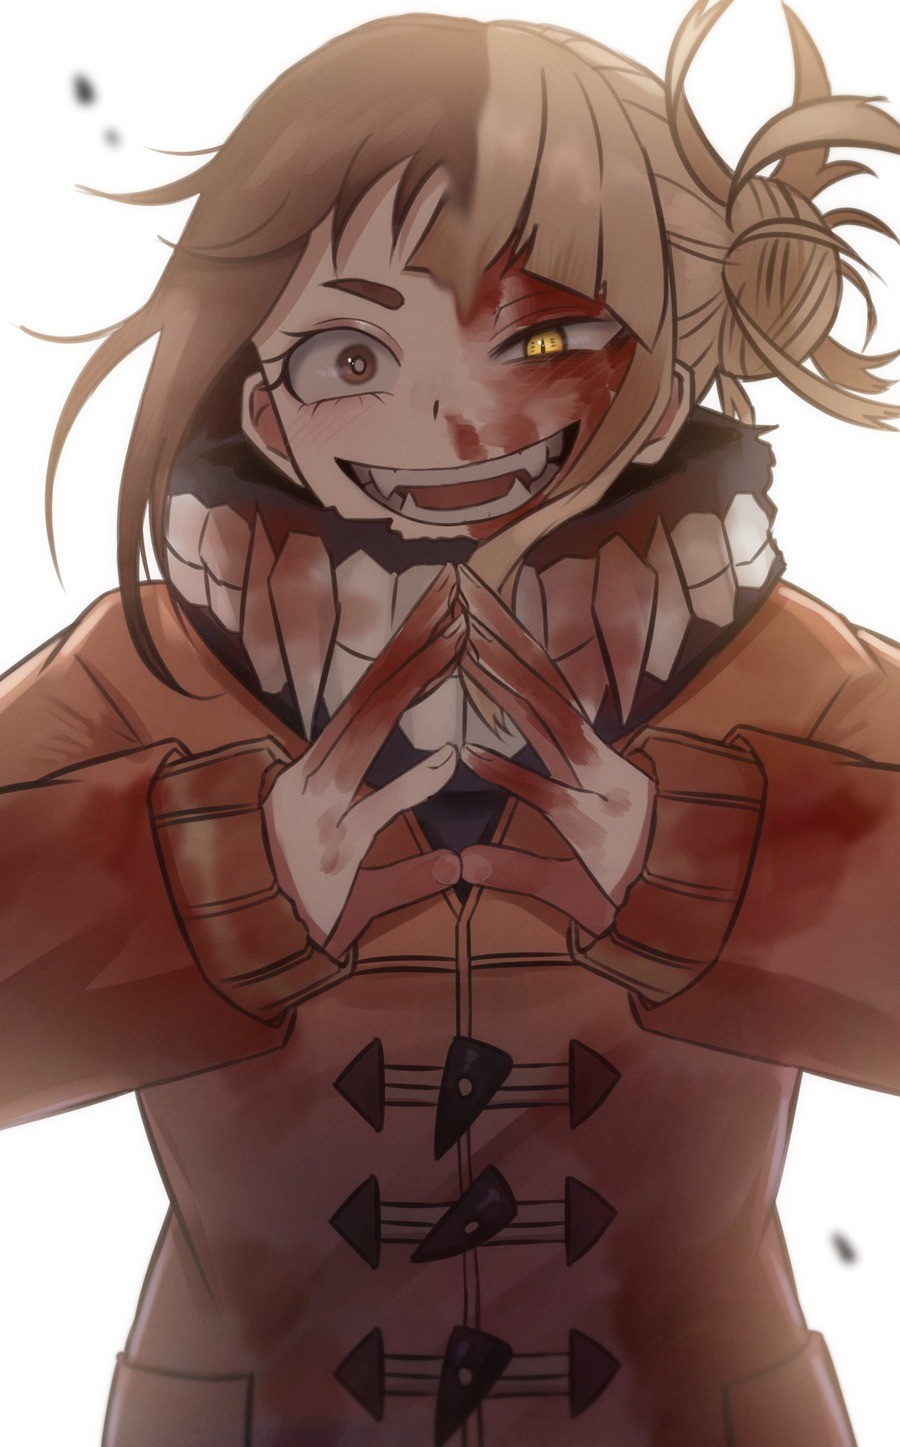 Daily Toga - 968: TogaRaka. join list: DailyToga (476 subs)Mention History Source: .. Just picked up this bad boy